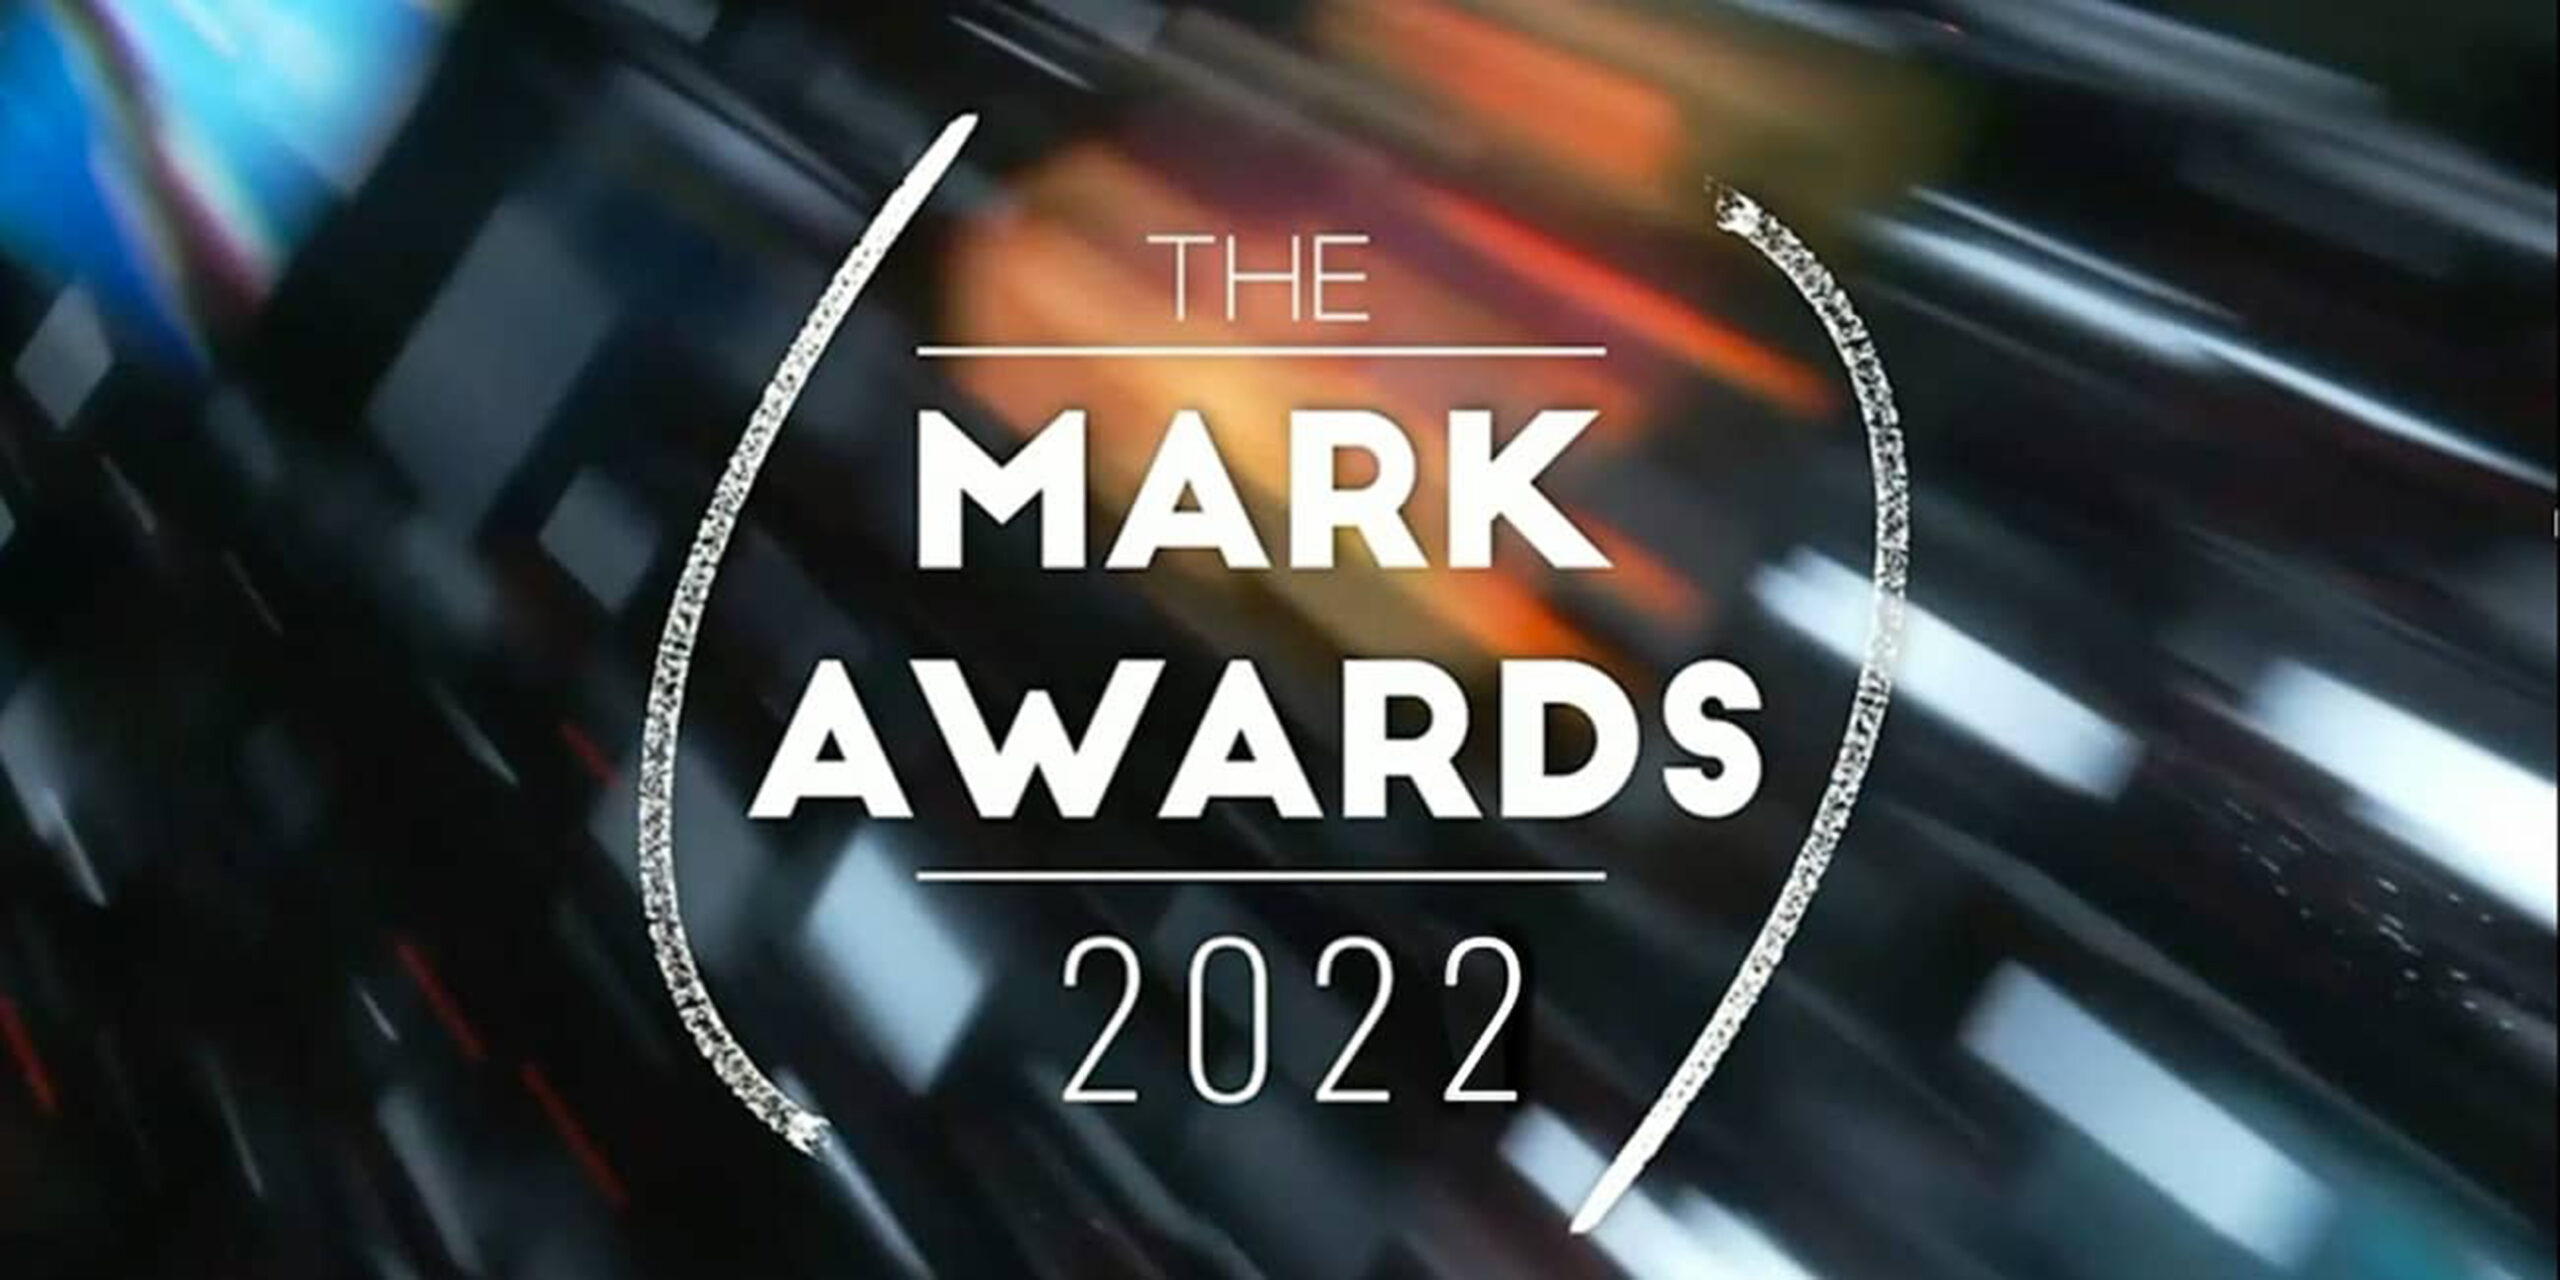 Mark Award 2022 for &#8220;Welcome Home&#8221;!